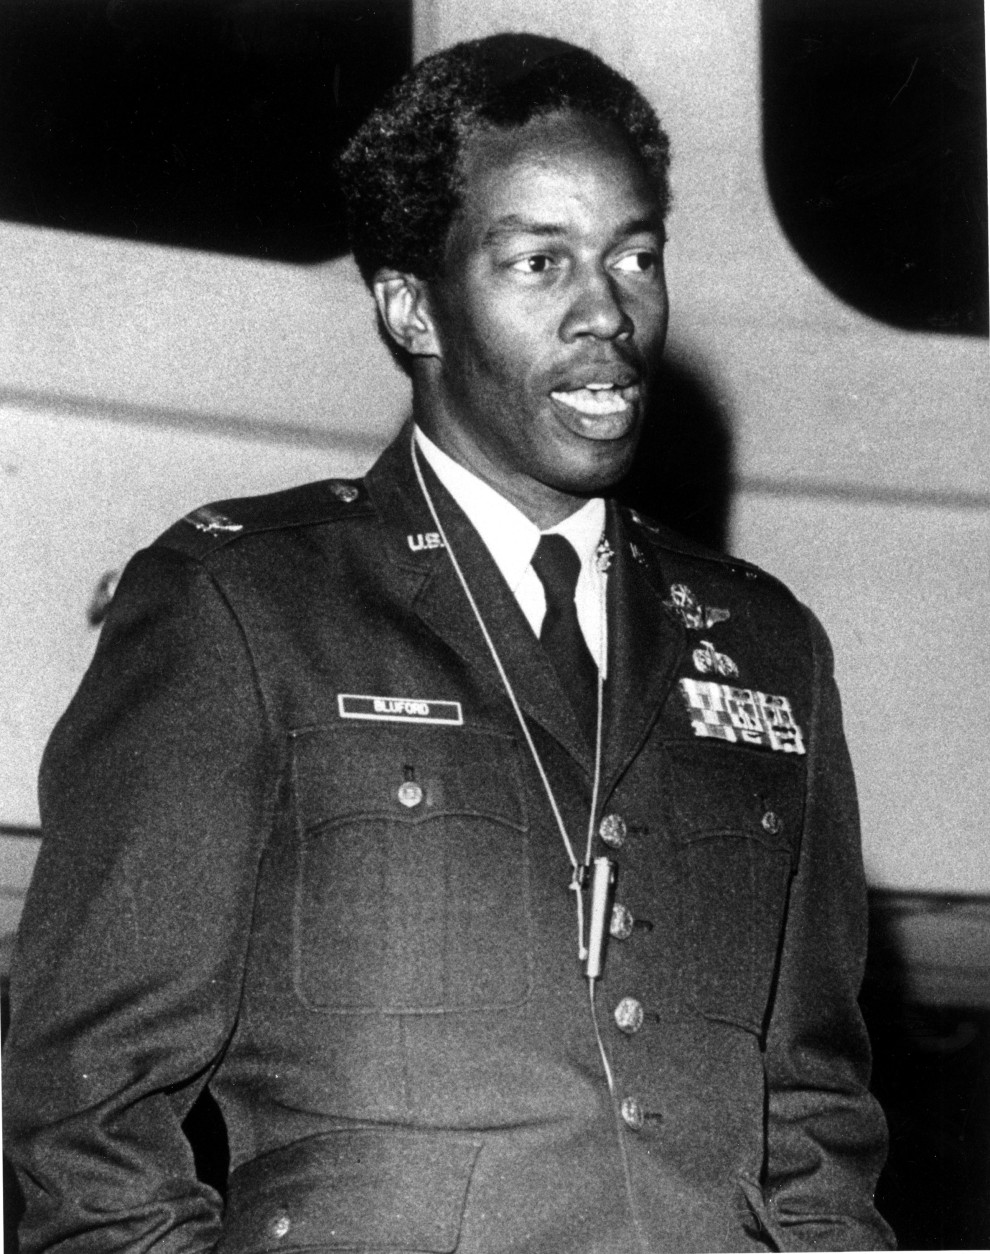 U.S. Air Force Lt. Colonel Guion Bluford speaks to a gathering at the University of Cincinnati in Cincinnati, Ohio on May 17, 1984.  Lt. Bluford, the first African-American to travel into space, rode the shuttle Challenger in Aug. 1983.  (AP Photo/Perry Hughes)